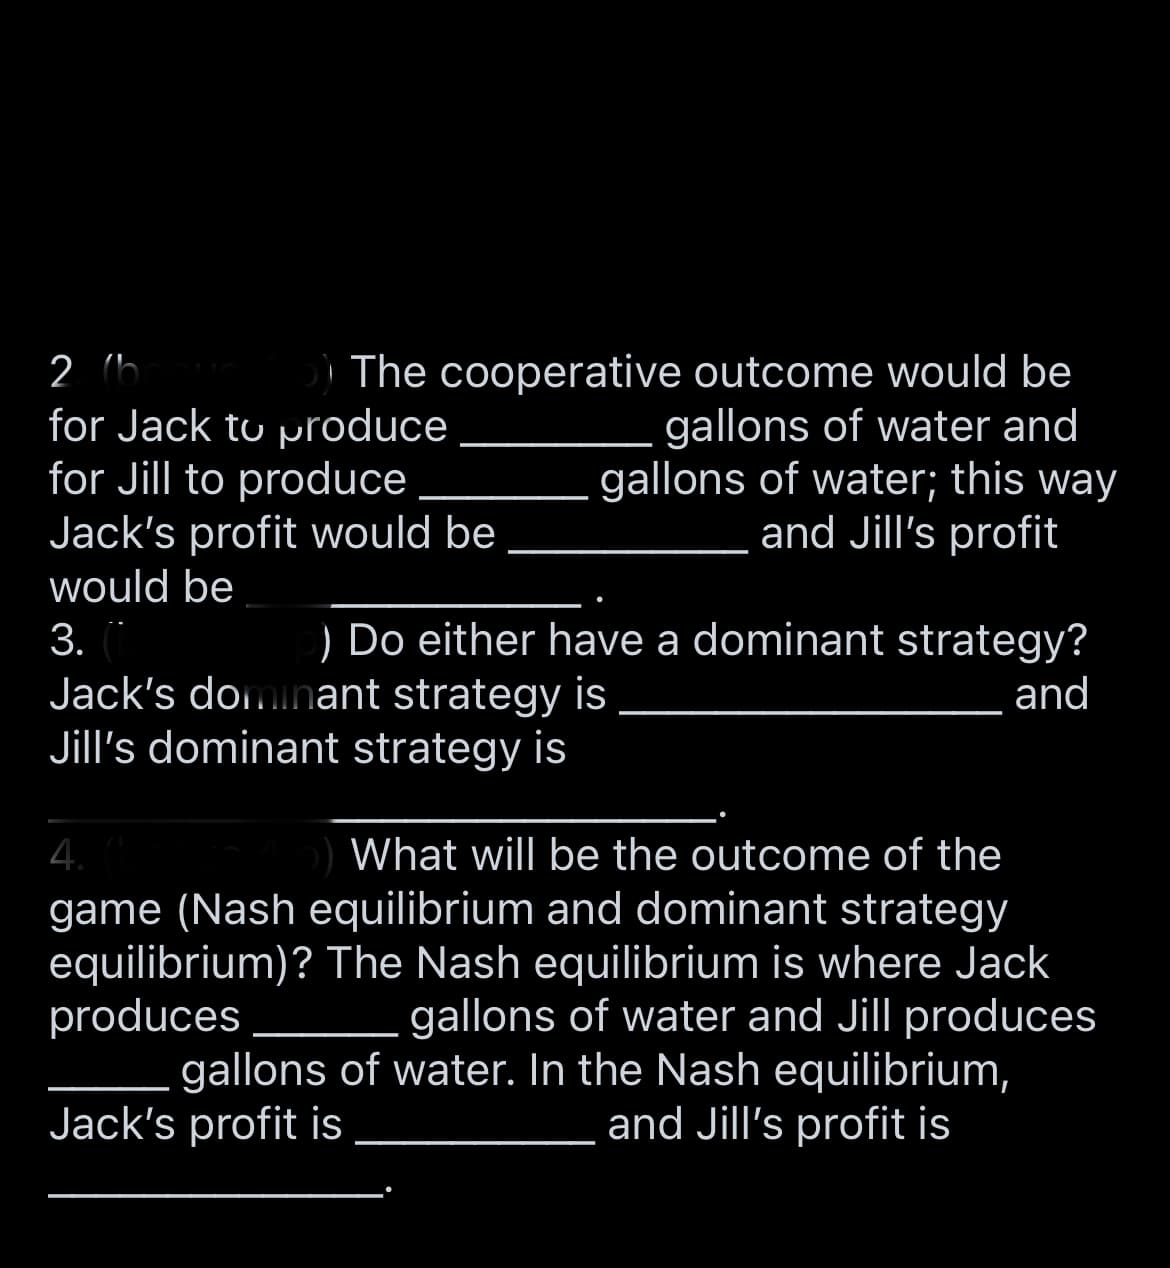 2 (b
for Jack to produce
for Jill to produce
Jack's profit would be
The cooperative outcome would be
gallons of water and
gallons of water; this way
and Jill's profit
would be
3.
) Do either have a dominant strategy?
Jack's doinant strategy is
Jill's dominant strategy is
and
4.
game (Nash equilibrium and dominant strategy
equilibrium)? The Nash equilibrium is where Jack
produces
gallons of water. In the Nash equilibrium,
Jack's profit is
What will be the outcome of the
gallons of water and Jill produces
and Jill's profit is
